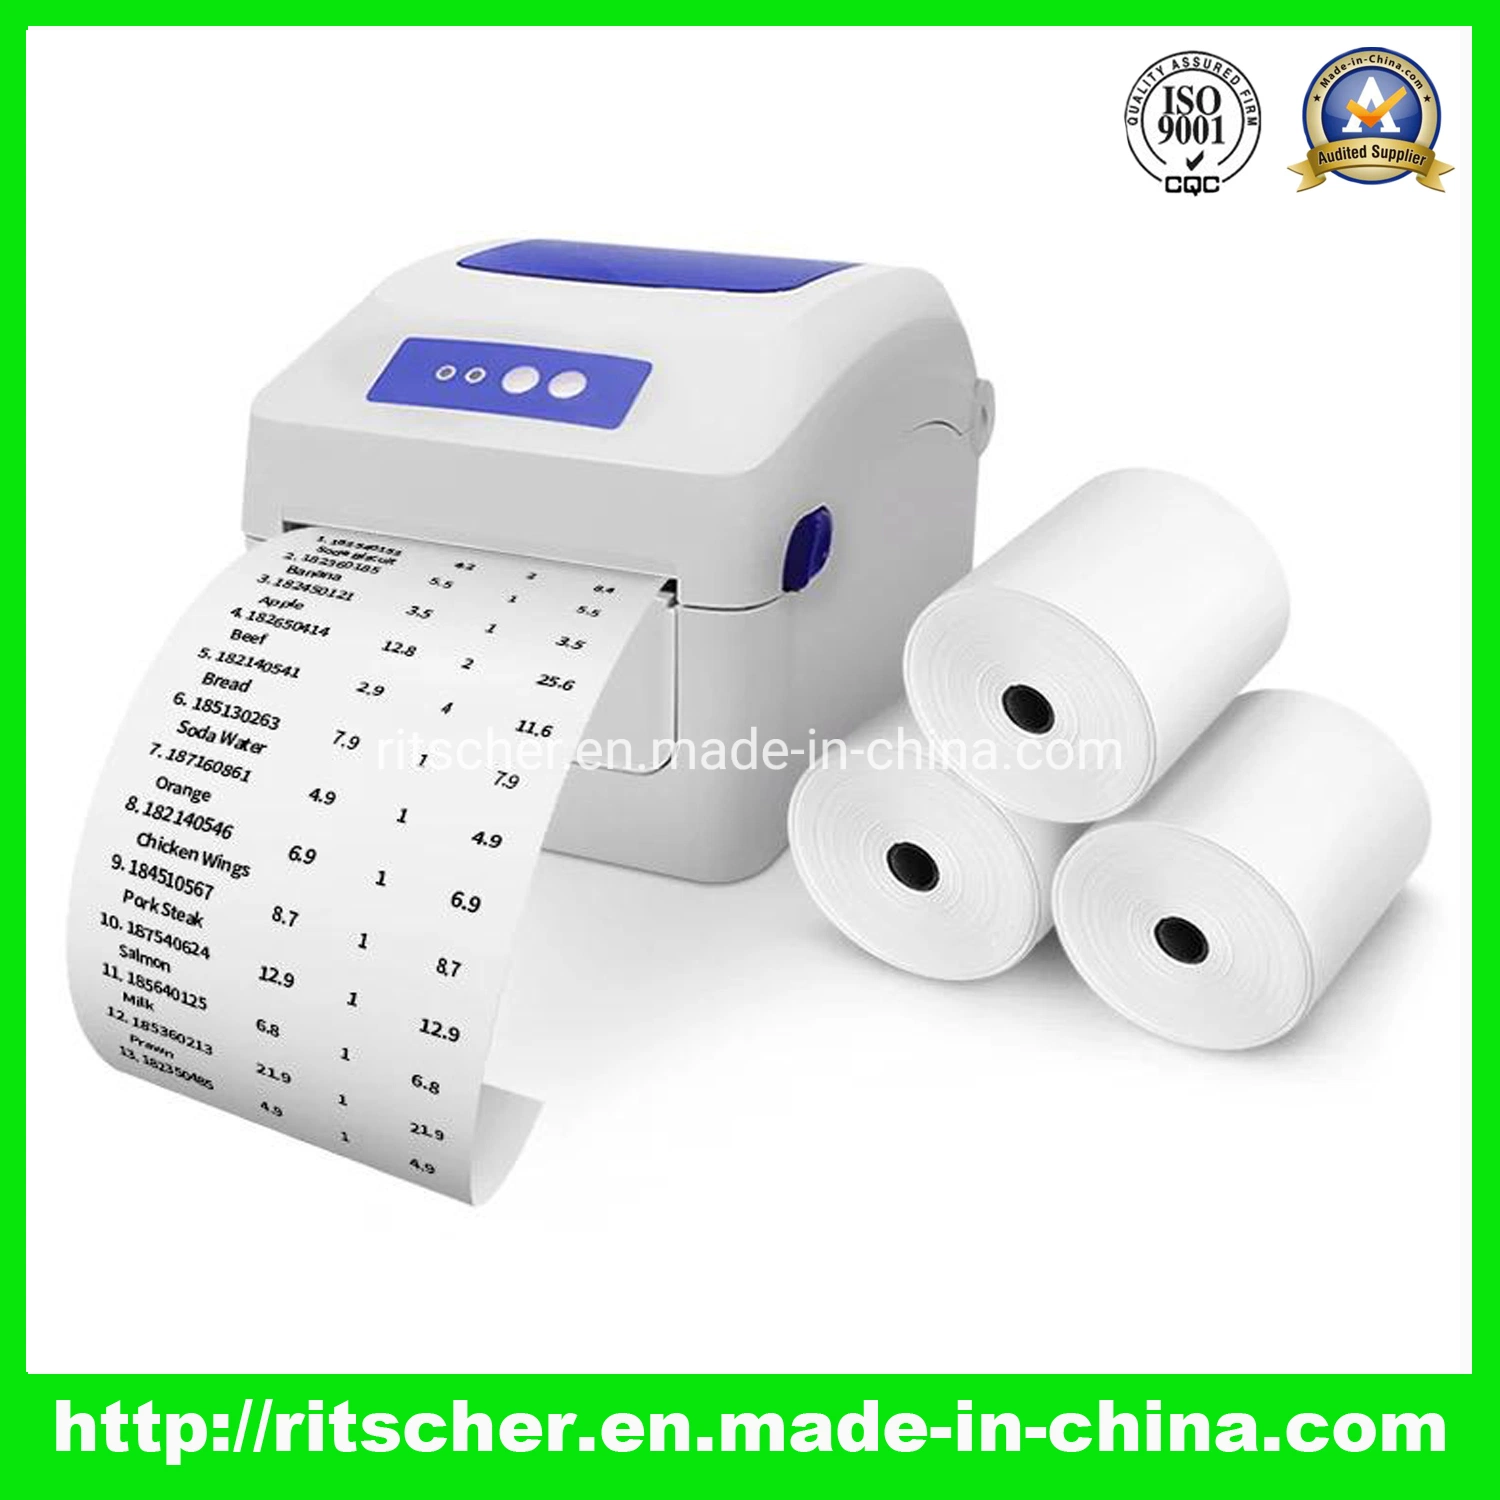 Thermal Paper Roll of 80X80 Cash Register Paper Roll